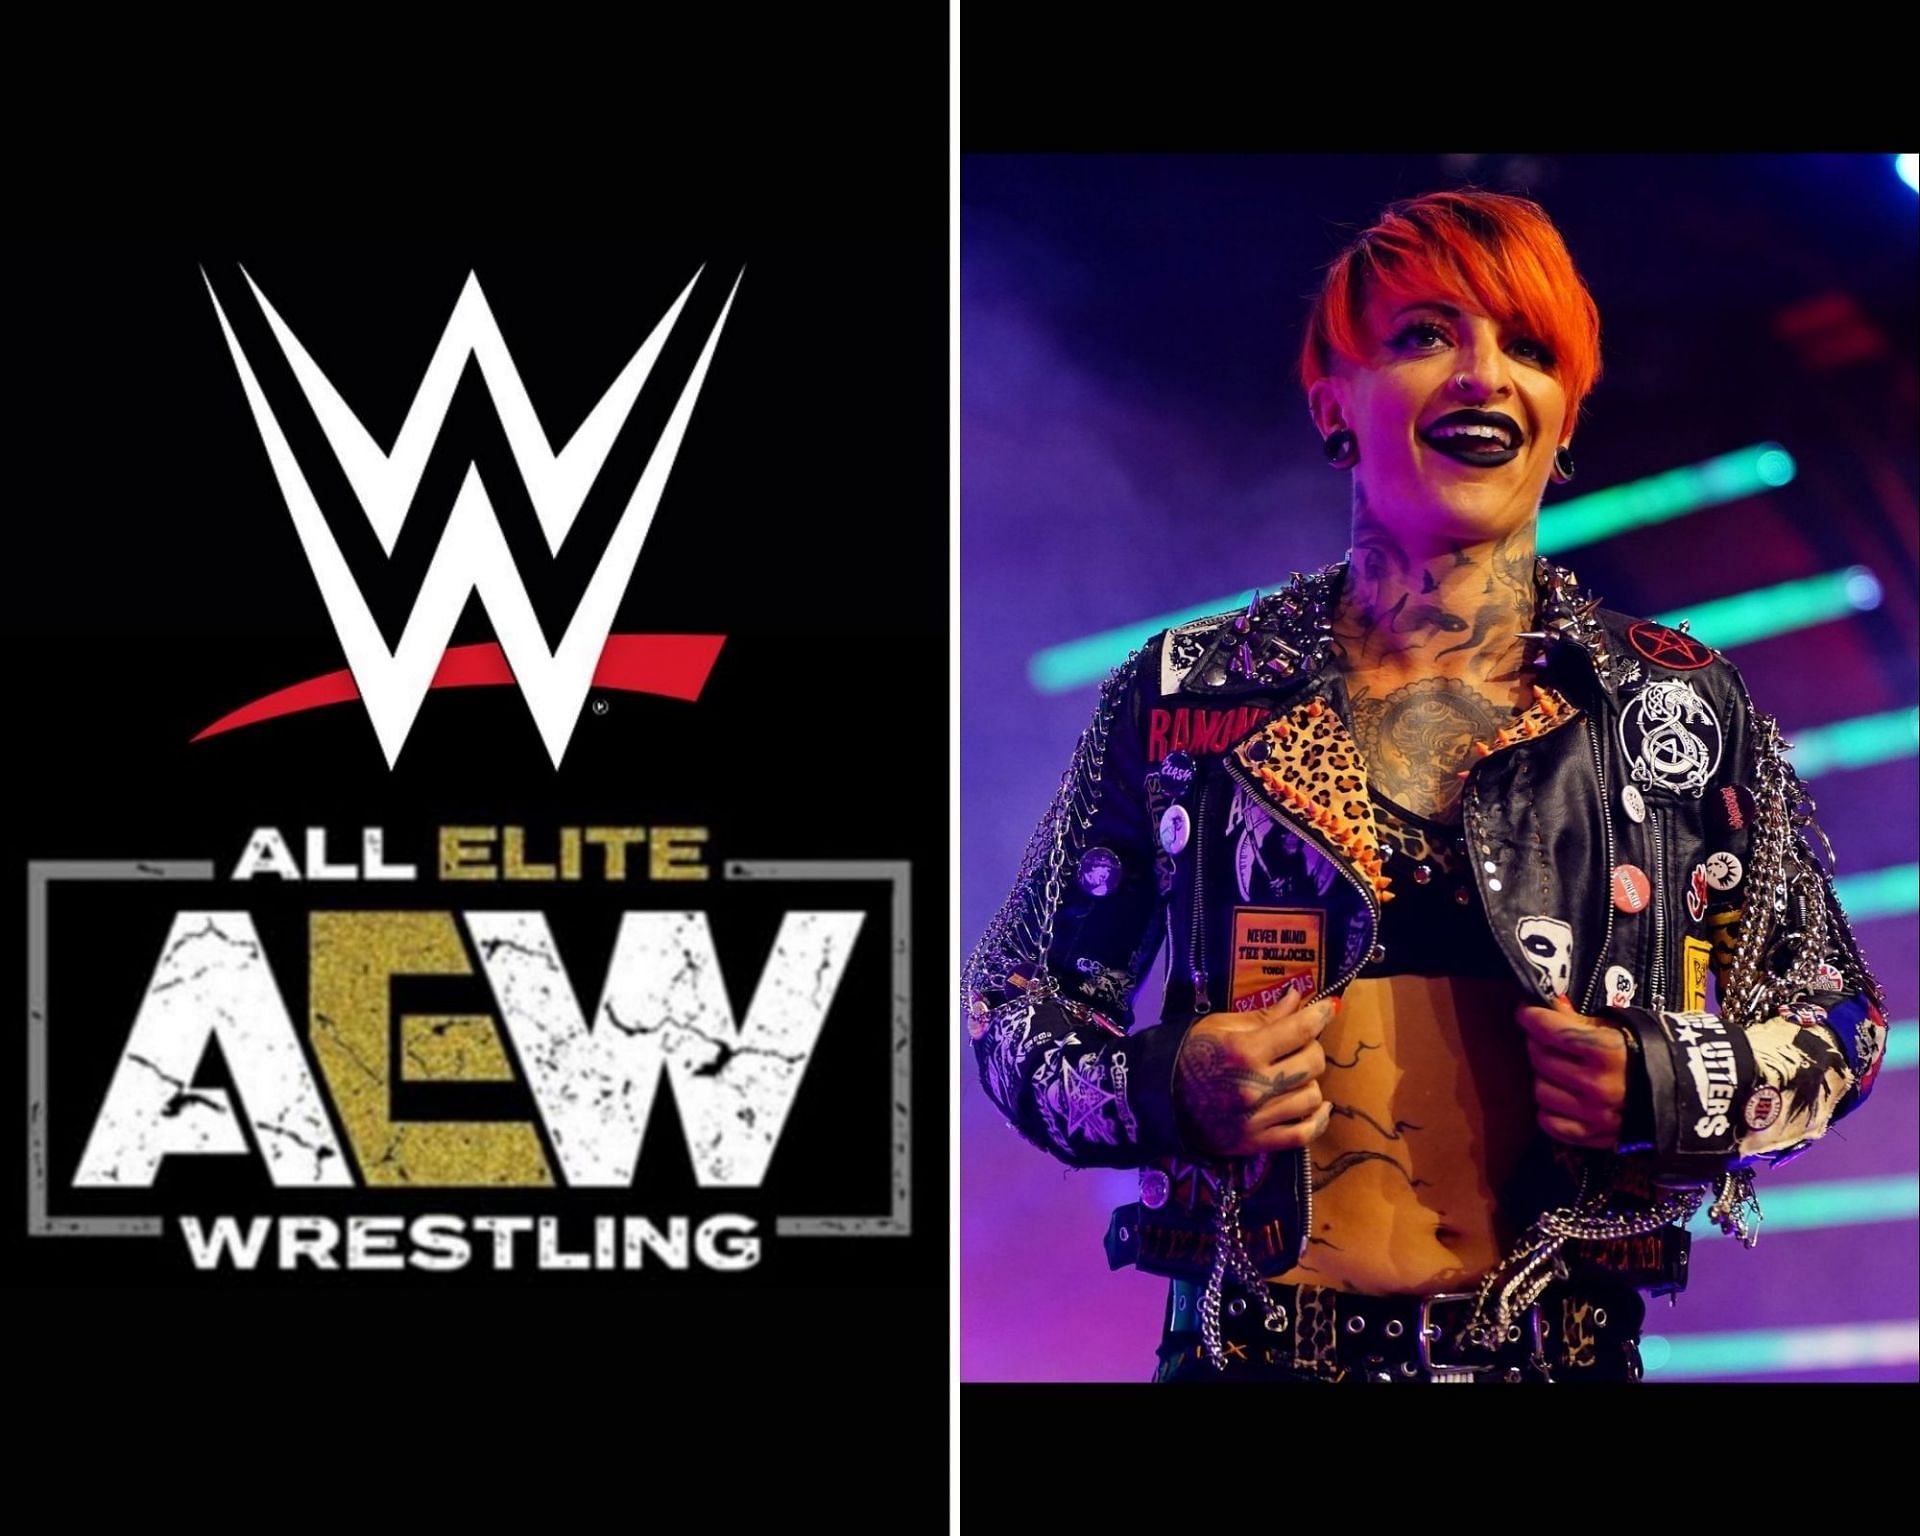 Ruby Soho has been in dominant form in AEW recently